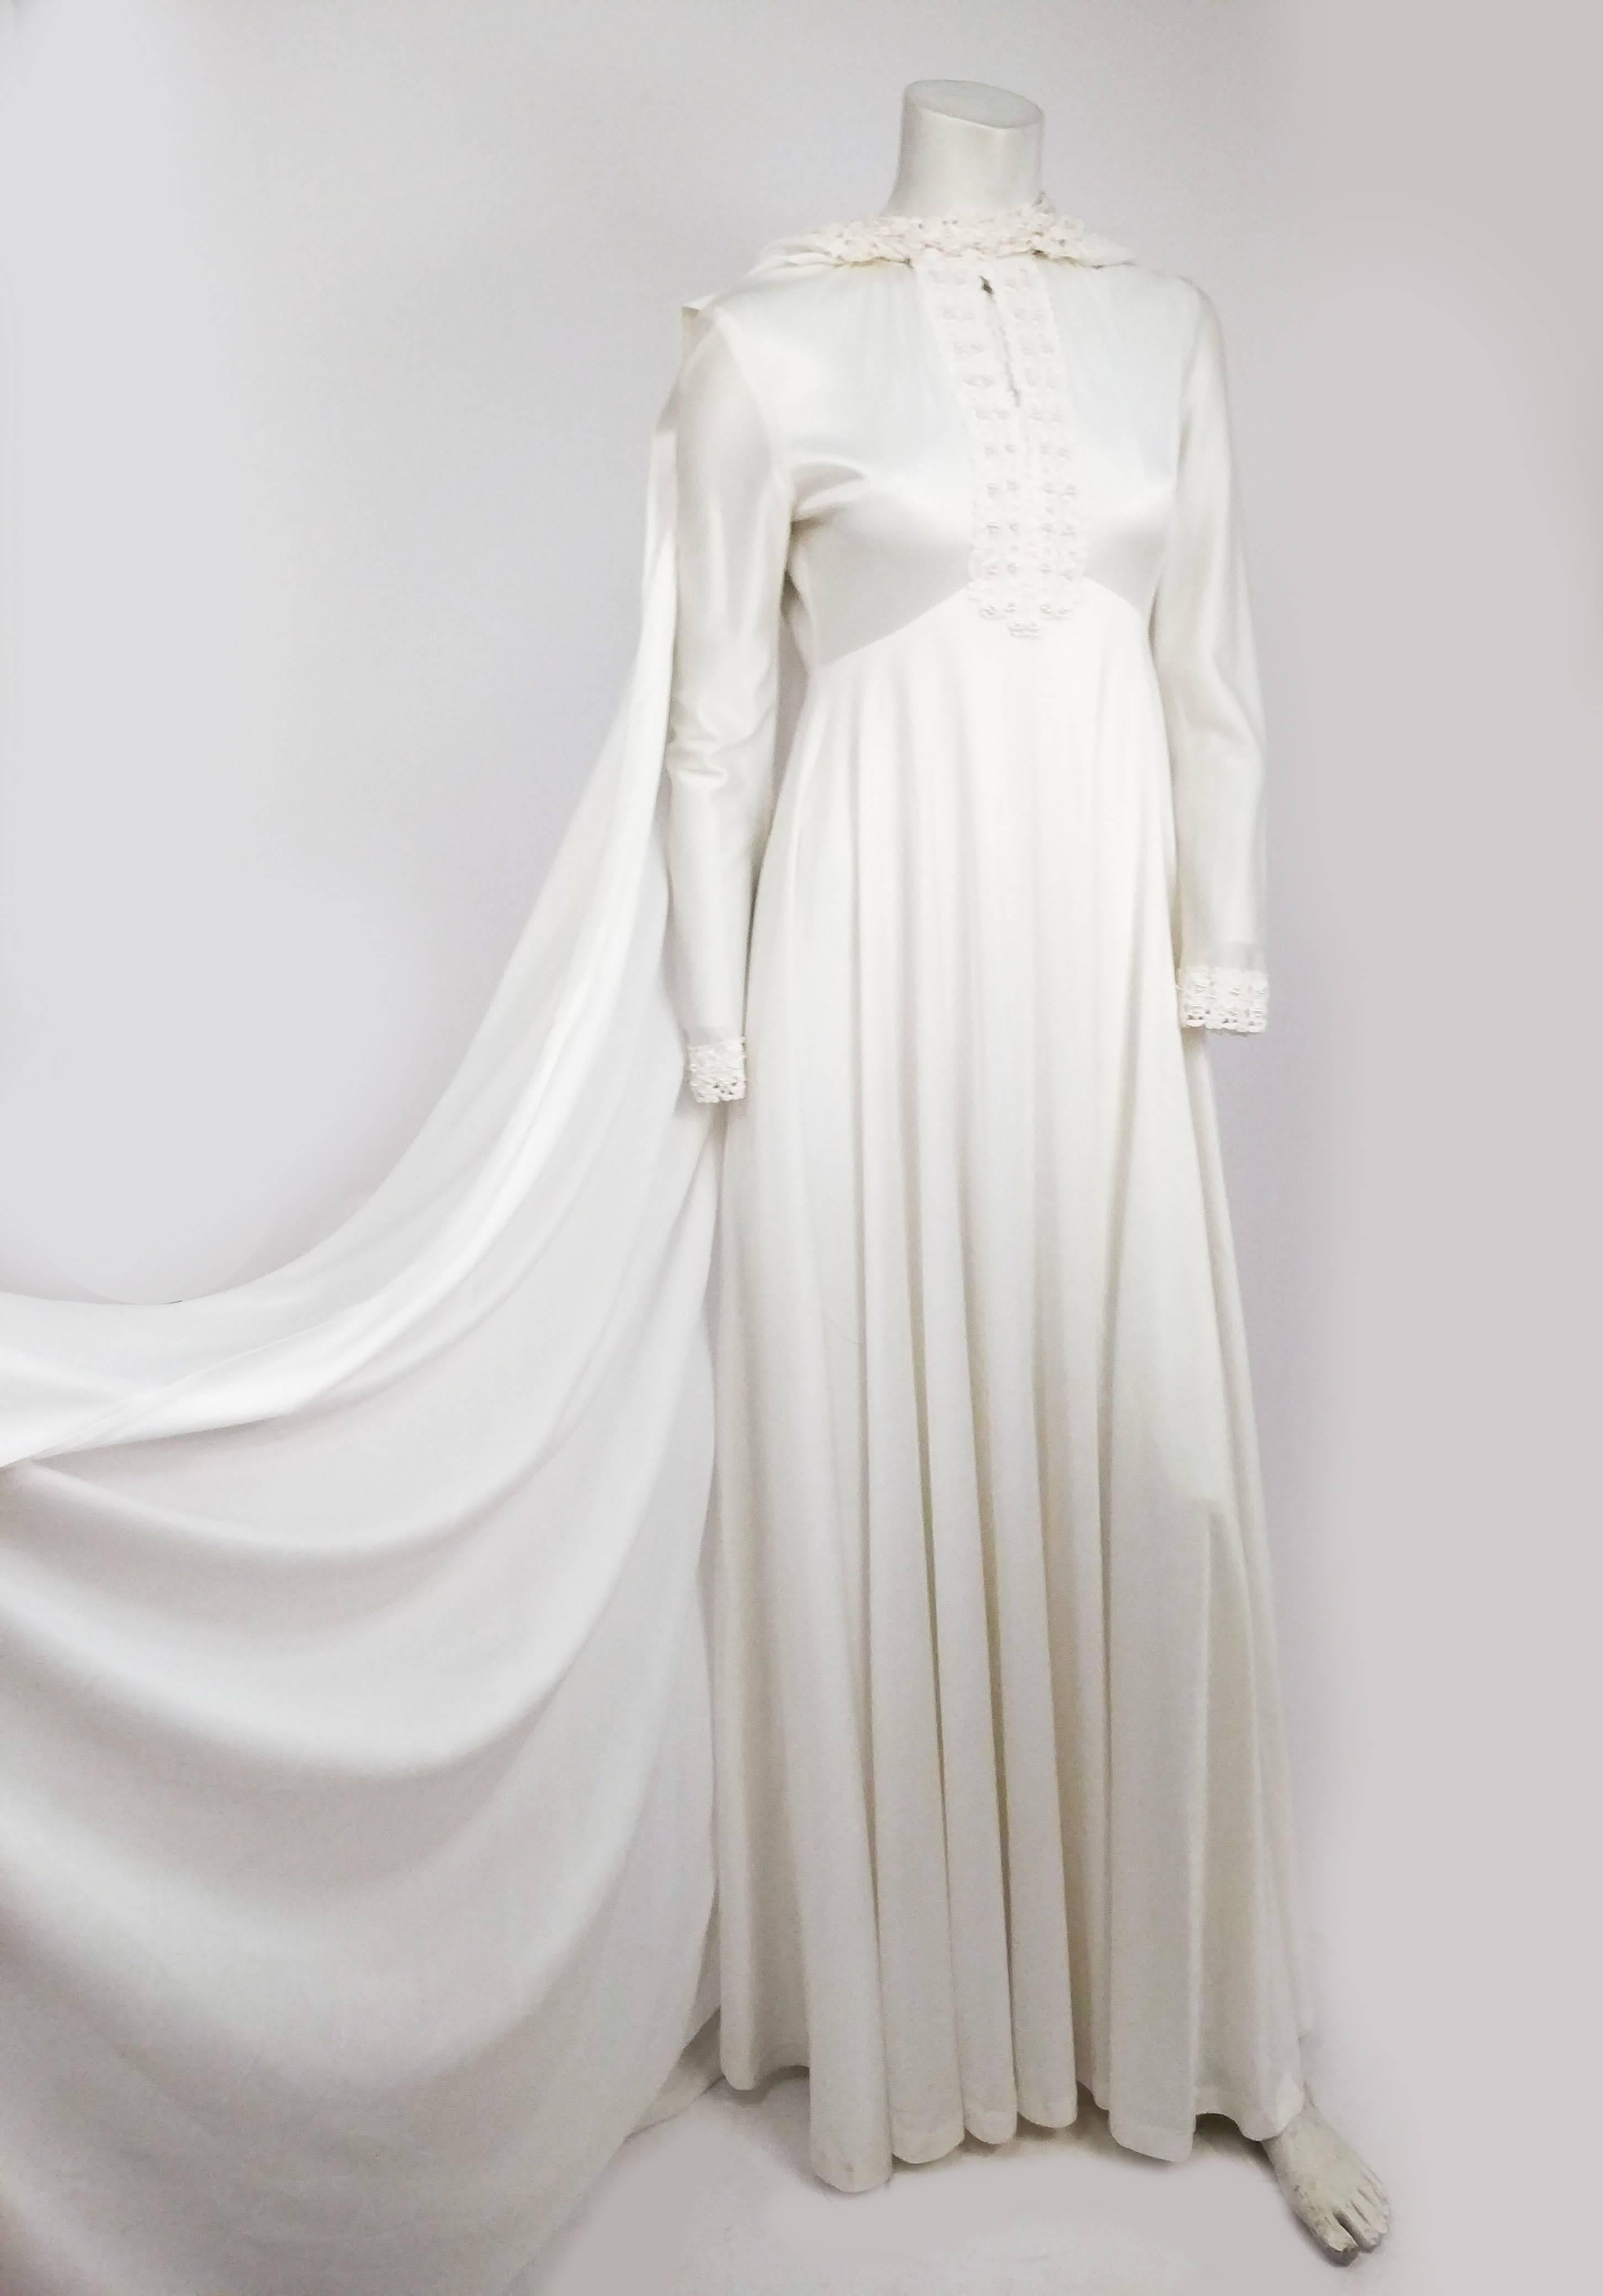 1970s White Maxi Dress w/ Hood & Cape. Angelic 1970s jersey dress with lace collar and detectable hood which hooks onto collar with hooks and eyes. 